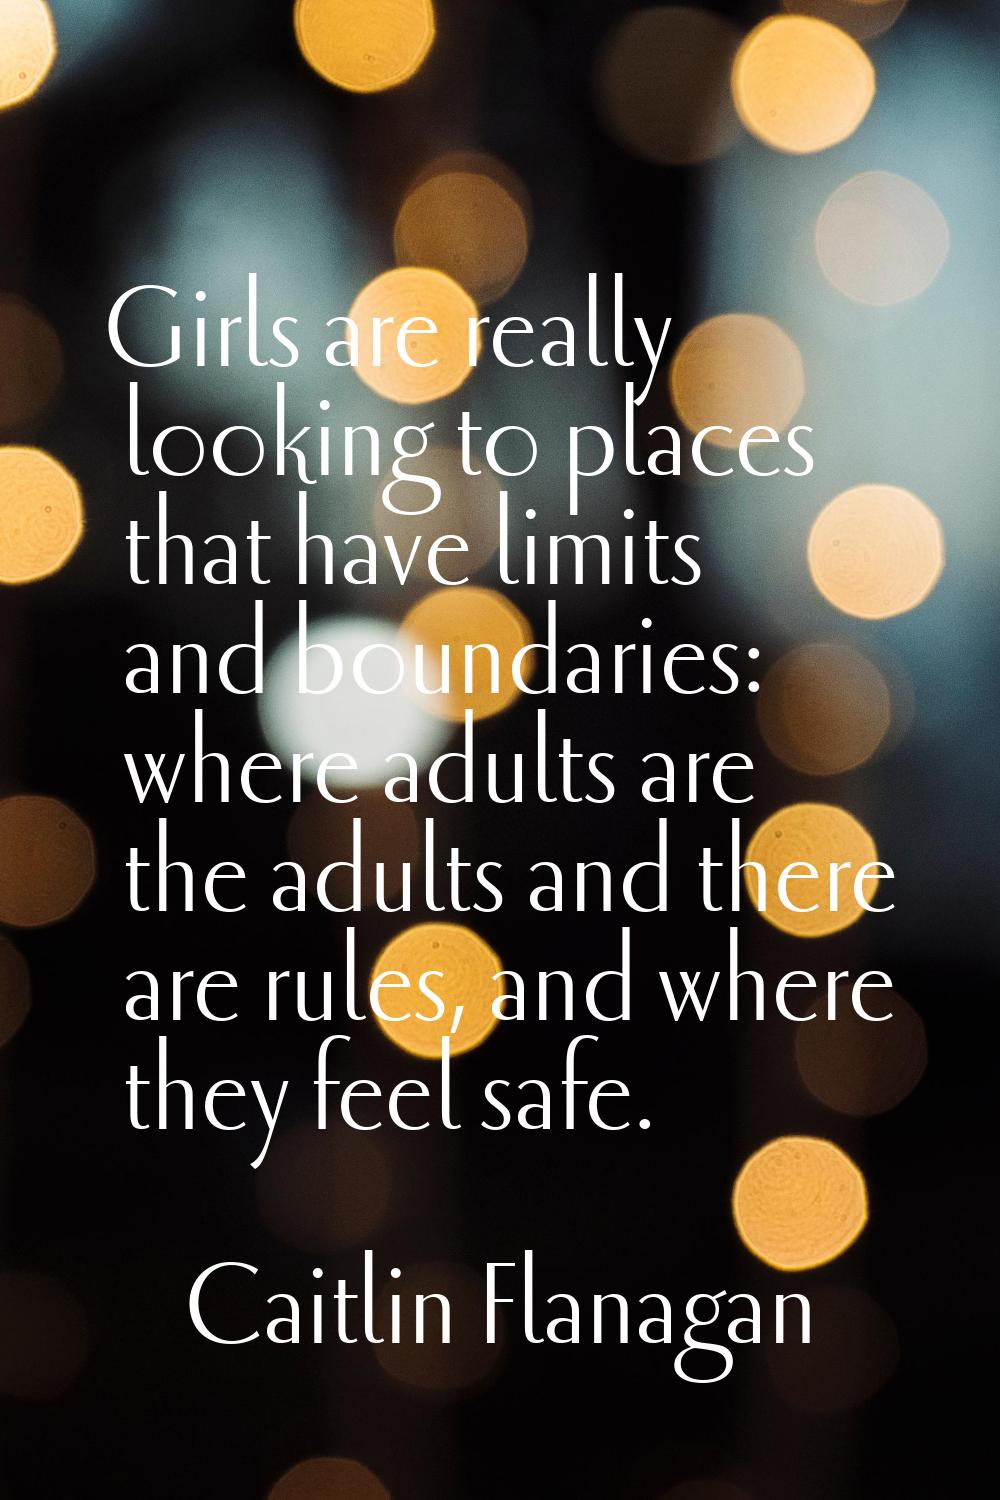 Girls are really looking to places that have limits and boundaries: where adults are the adults and